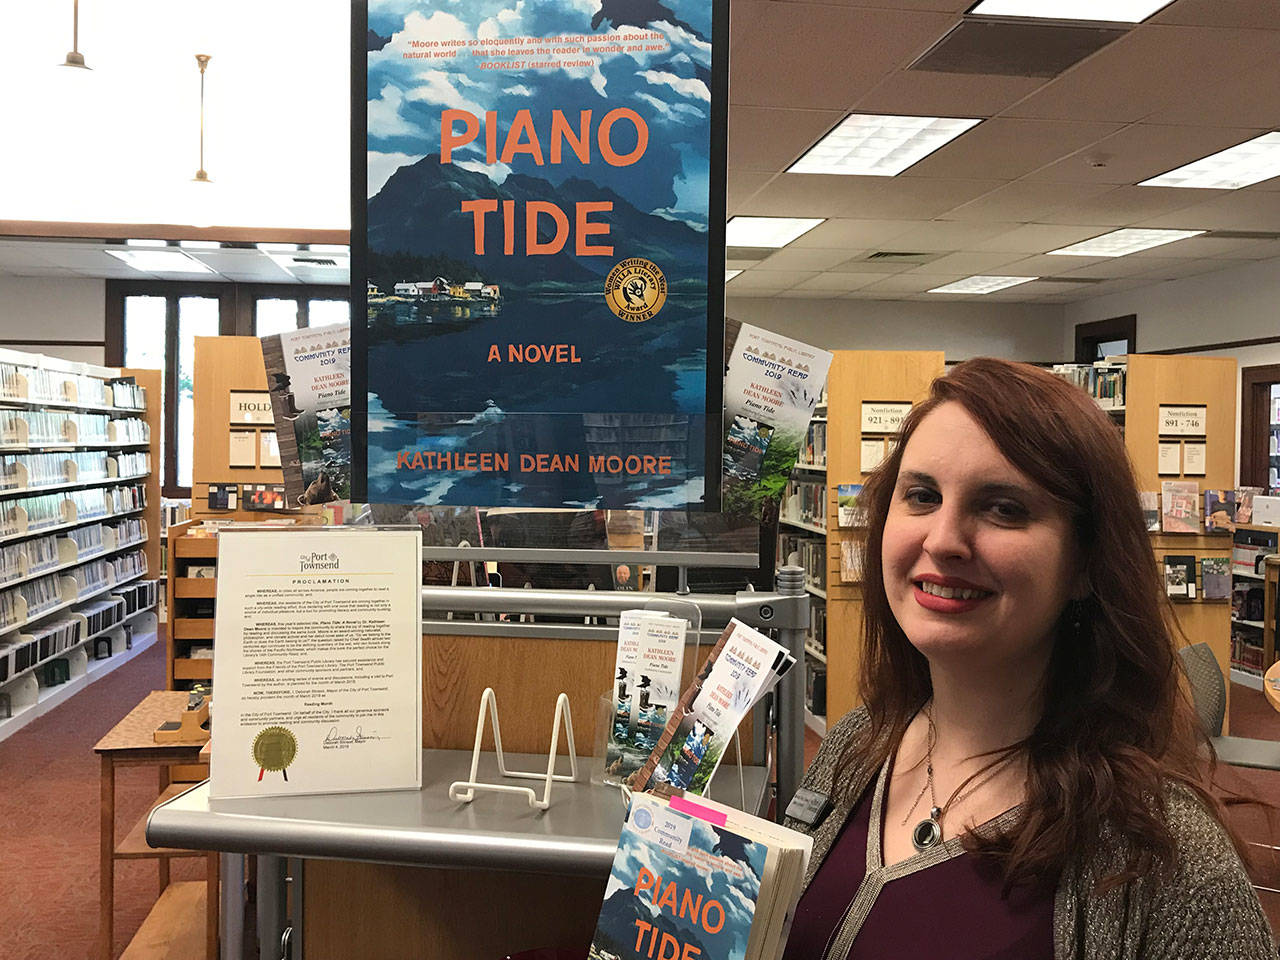 Port Townsend Library Director Melody Sky Eisler said more than 600 people have attended events focused on “Piano Tide,” which was selected to be the 14th annual Community Read through March. (Brian McLean/Peninsula Daily News)